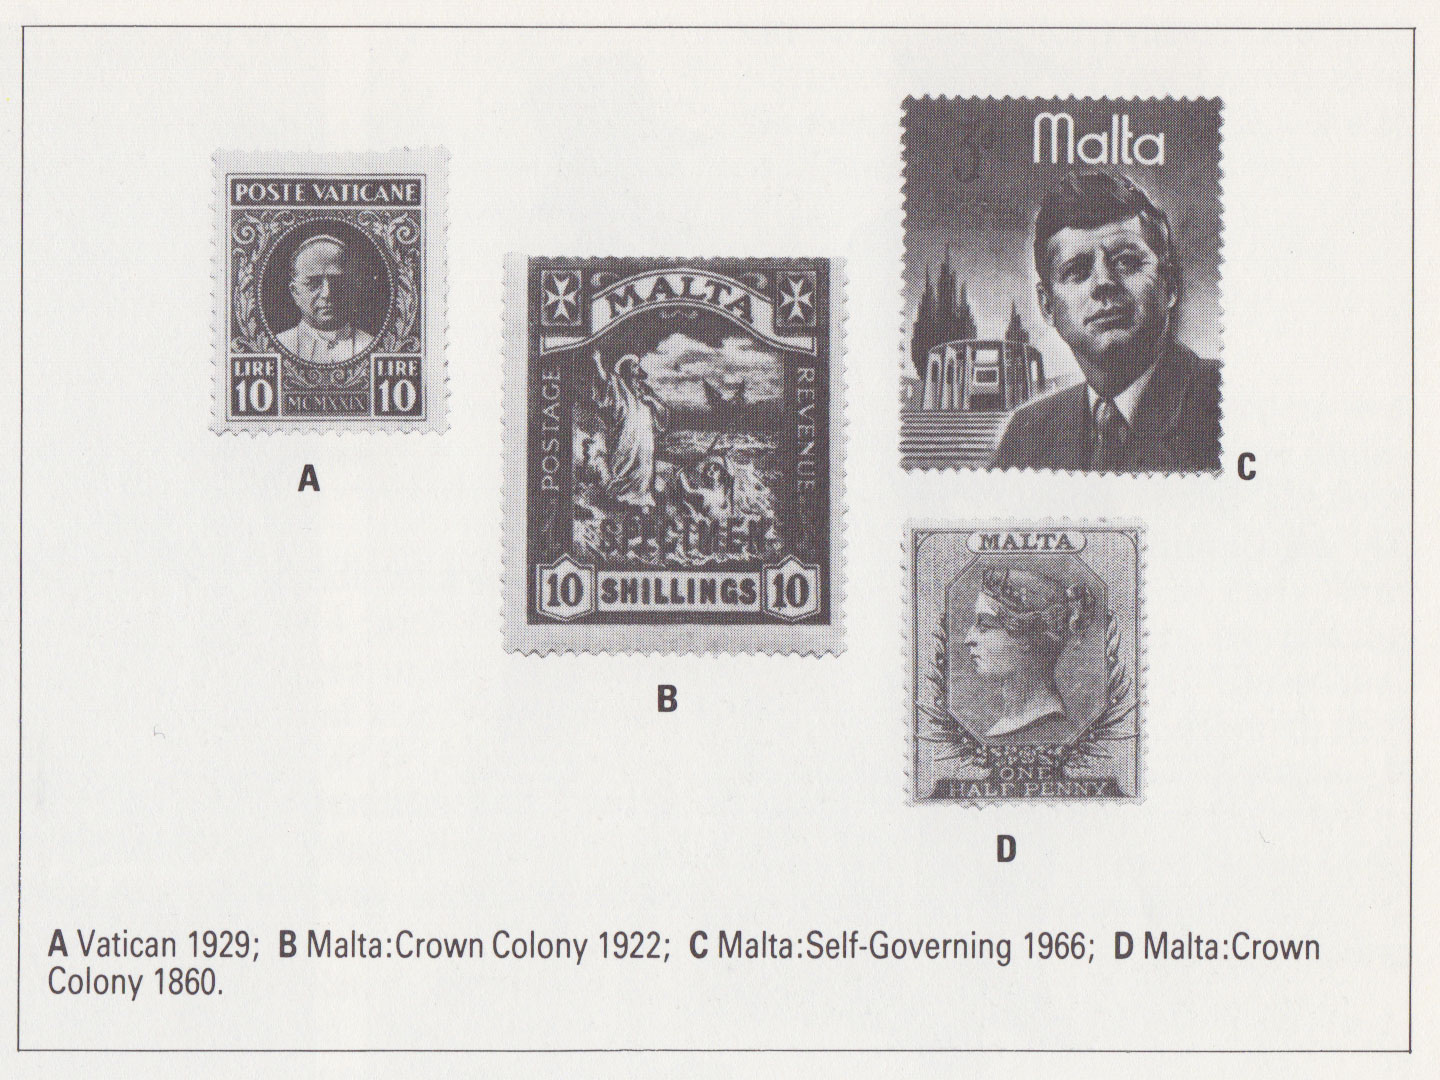 Malta Crown Colony and Vatican stamps